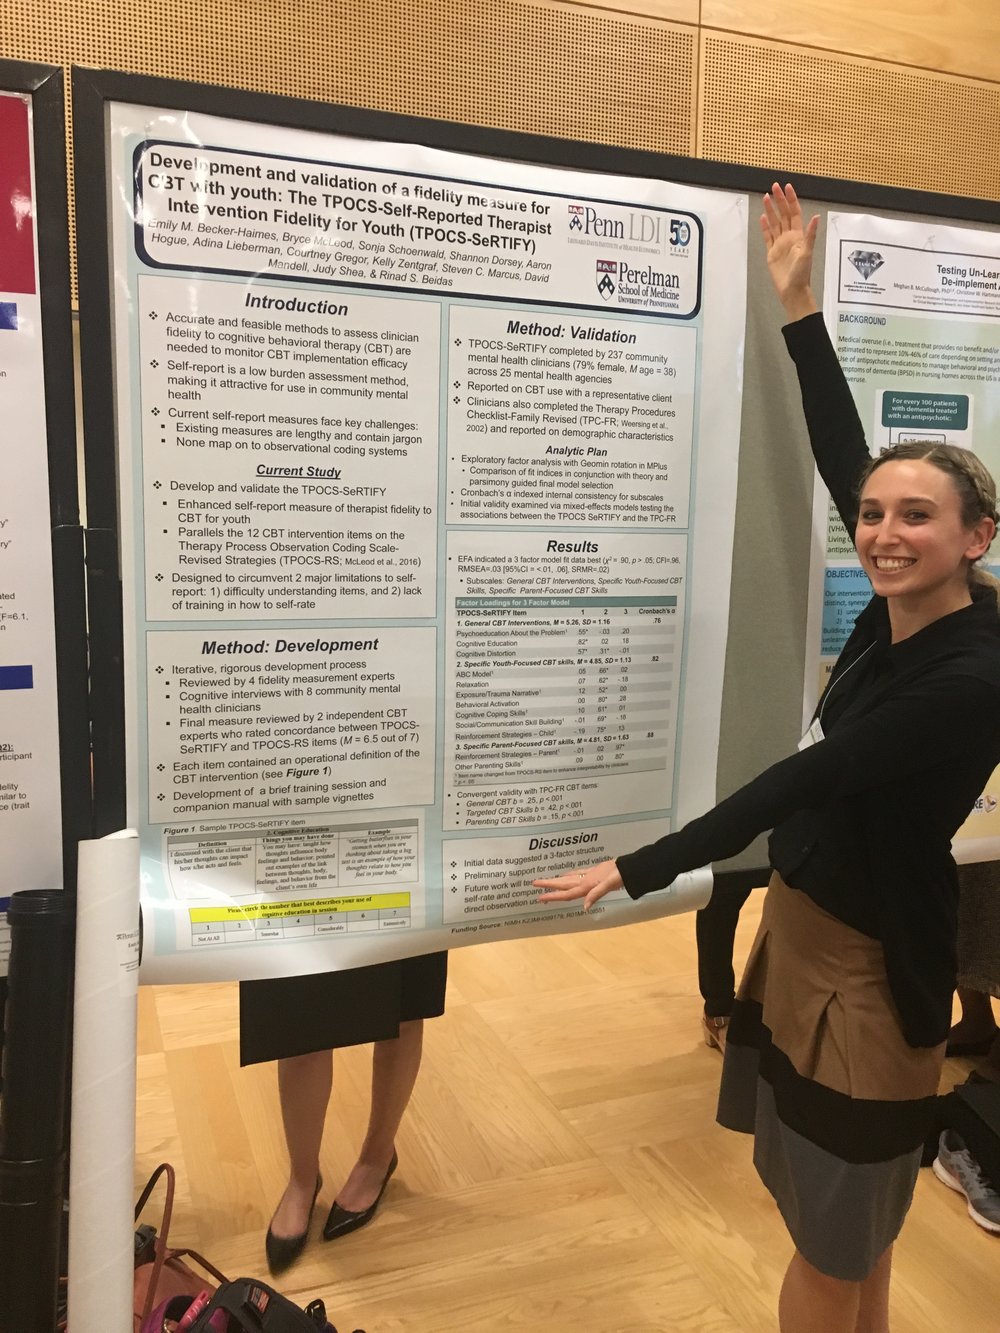 Emily Becker-Haimes presenting her poster on TPOCS-SeRTIFY at the Society for Implementation Research Collaboration (SIRC) Conference in September 2017